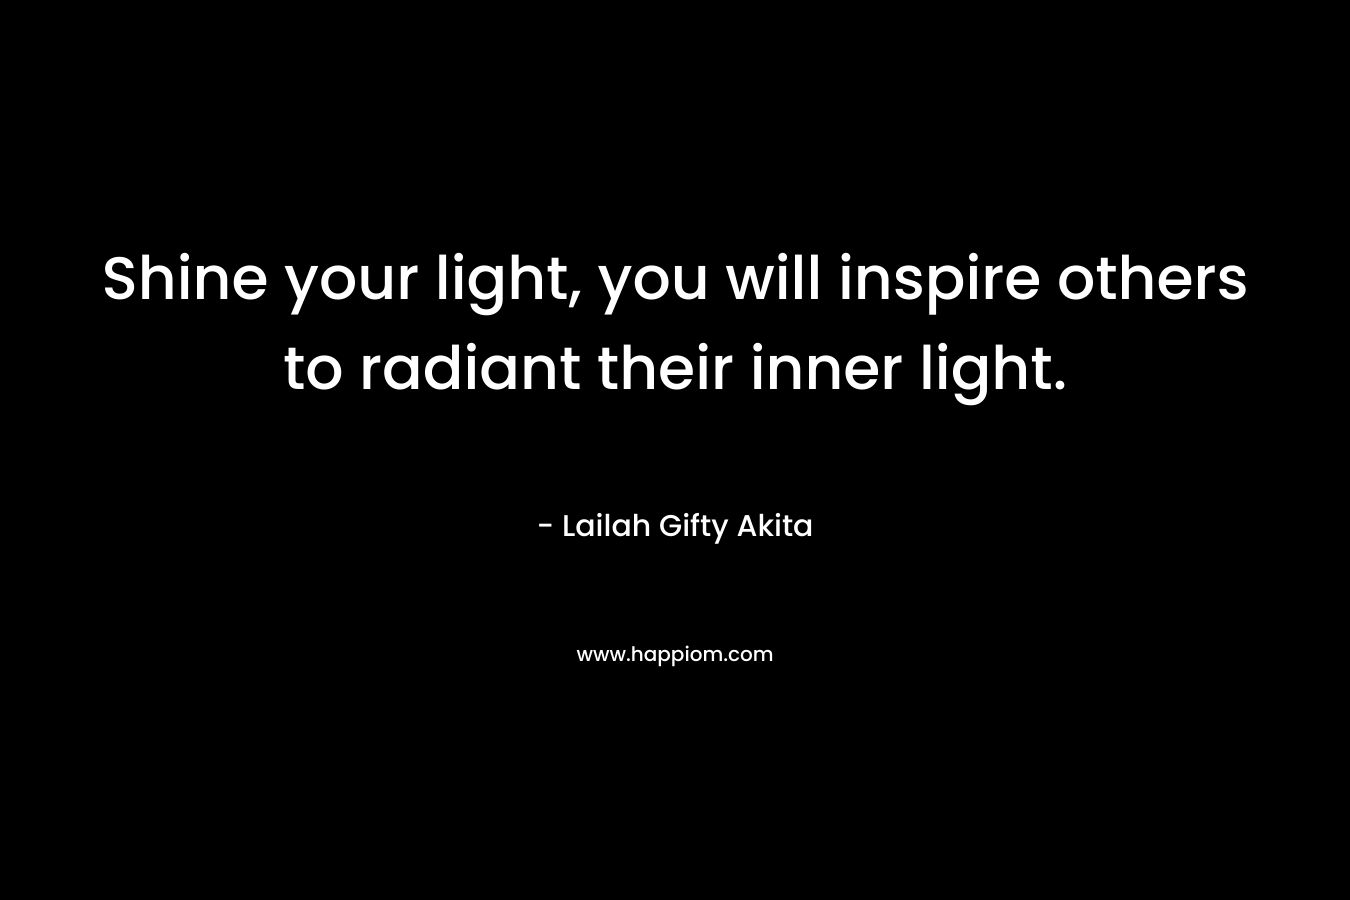 Shine your light, you will inspire others to radiant their inner light.